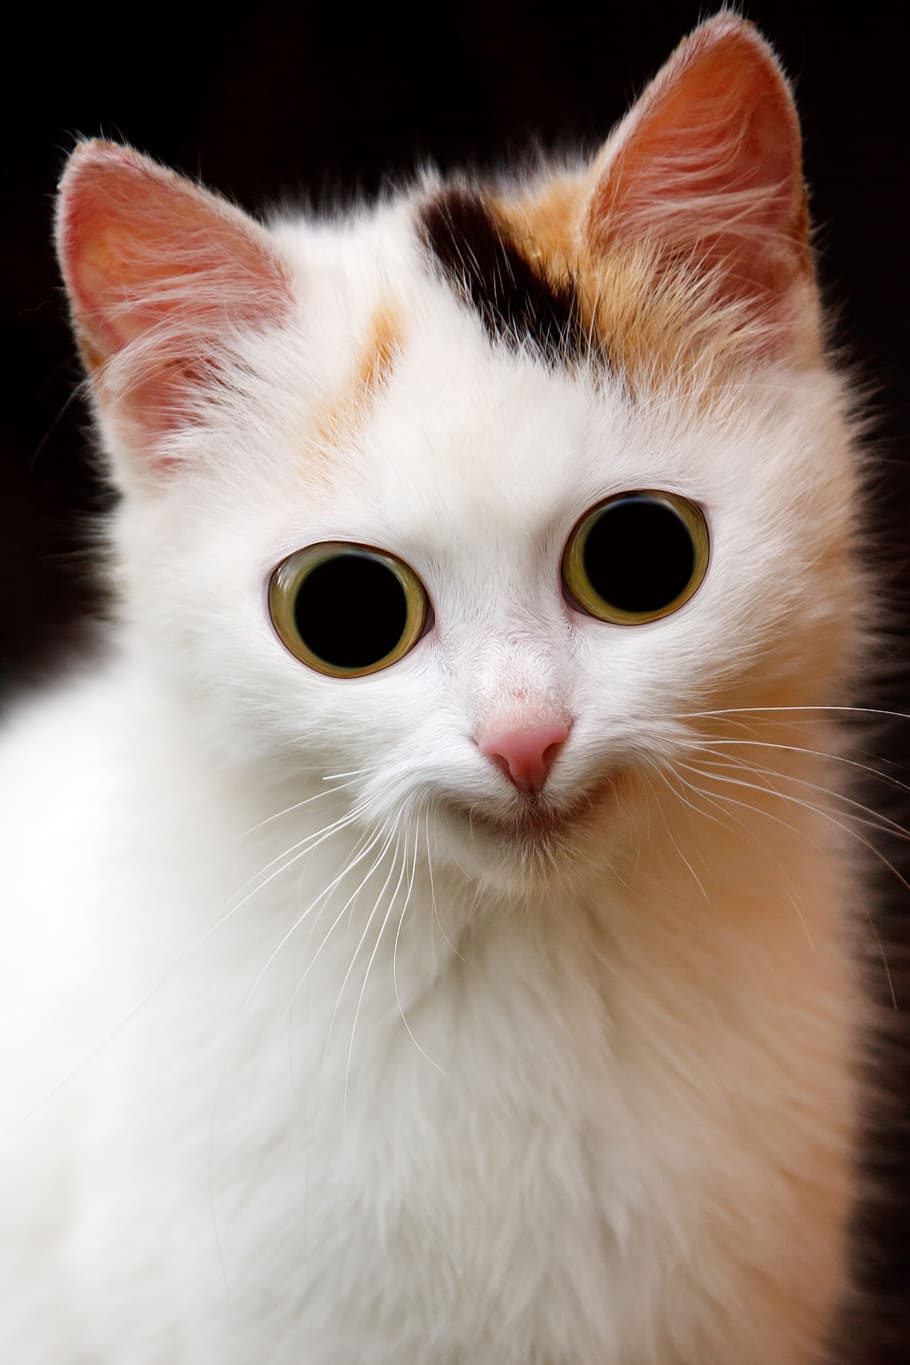 close, calico, cat, close up, calico cat, animal, scary, domestic, ears, eye